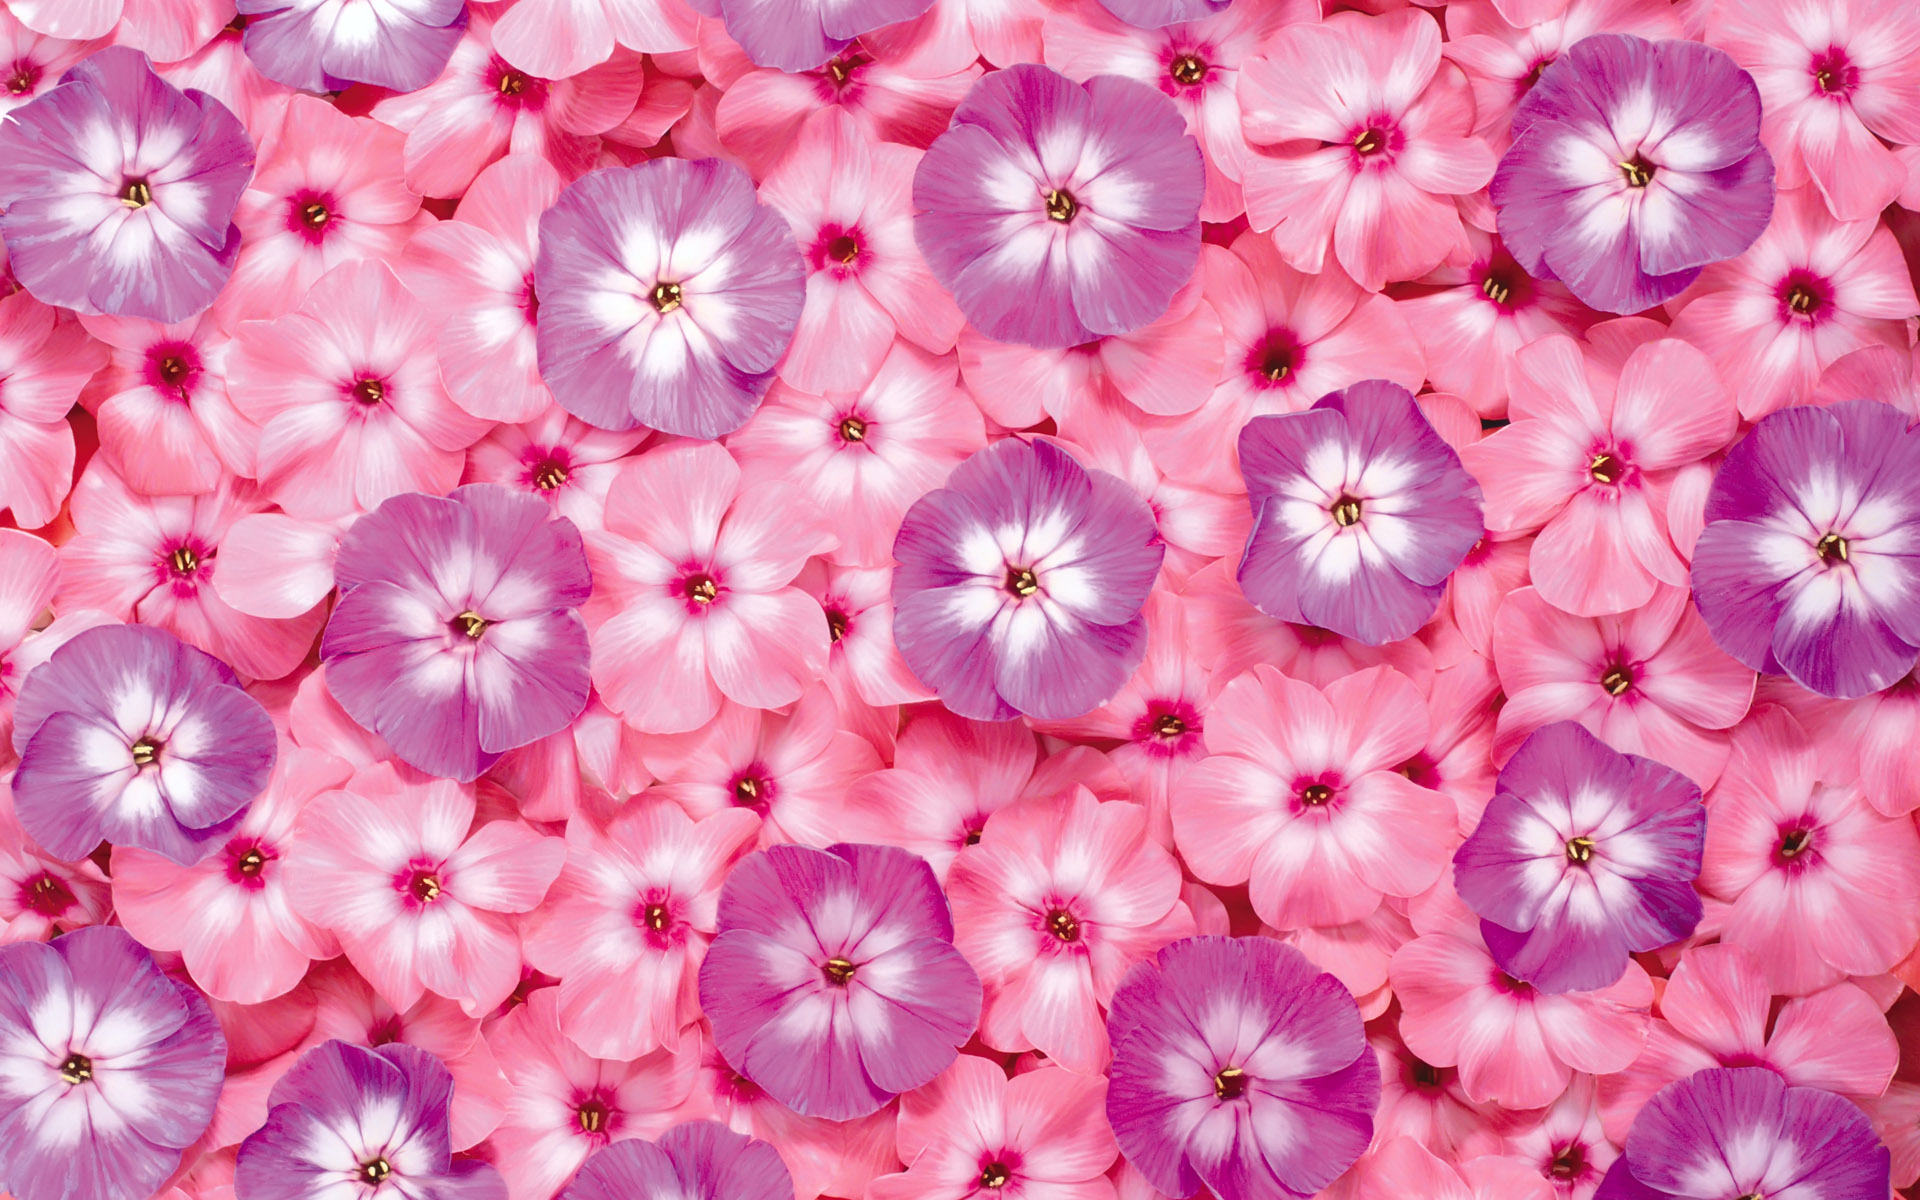  first series of flowers background 13647   Flower background   Flowers